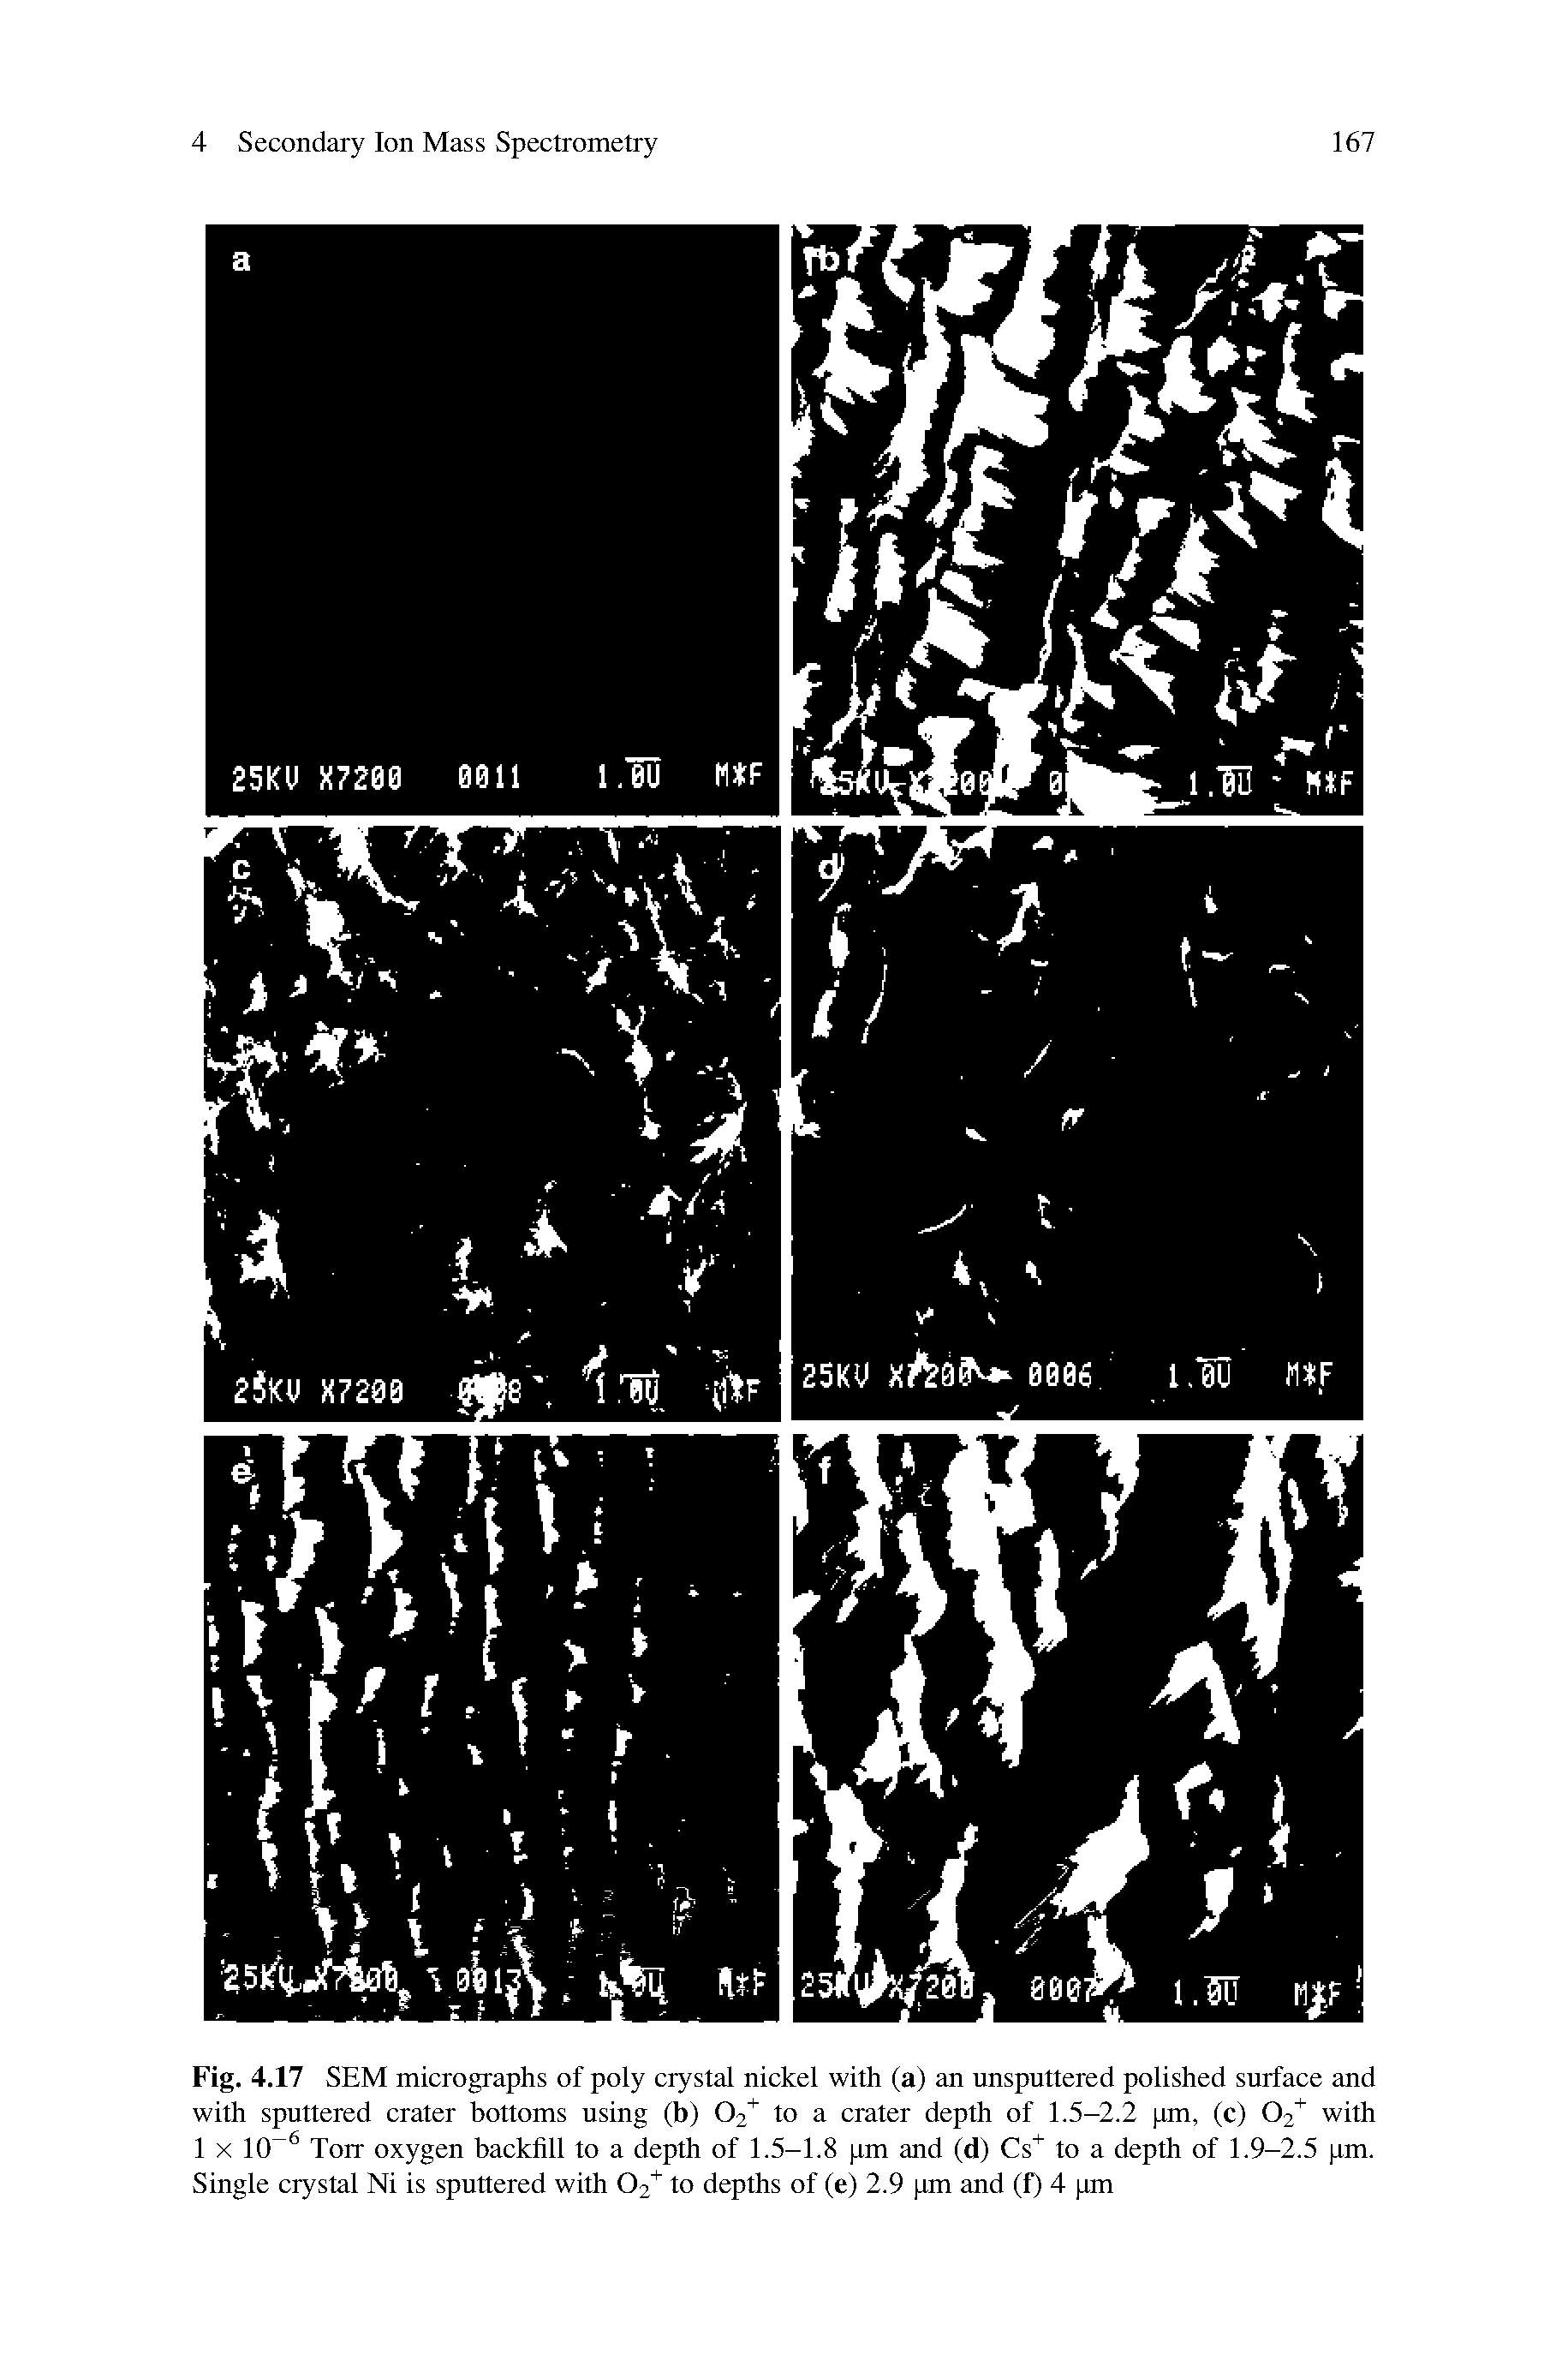 Fig. 4.17 SEM micrographs of poly crystal nickel with (a) an unsputtered polished surface and with sputtered crater bottoms using (b) O2 to a crater depth of 1.5-2.2 pm, (c) O2 with 1 X 10 Torr oxygen backfill to a depth of 1.5-1.8 pm and (d) Cs to a depth of 1.9-2.5 pm. Single crystal Ni is sputtered with O2 to depths of (e) 2.9 pm and (f) 4 pm...